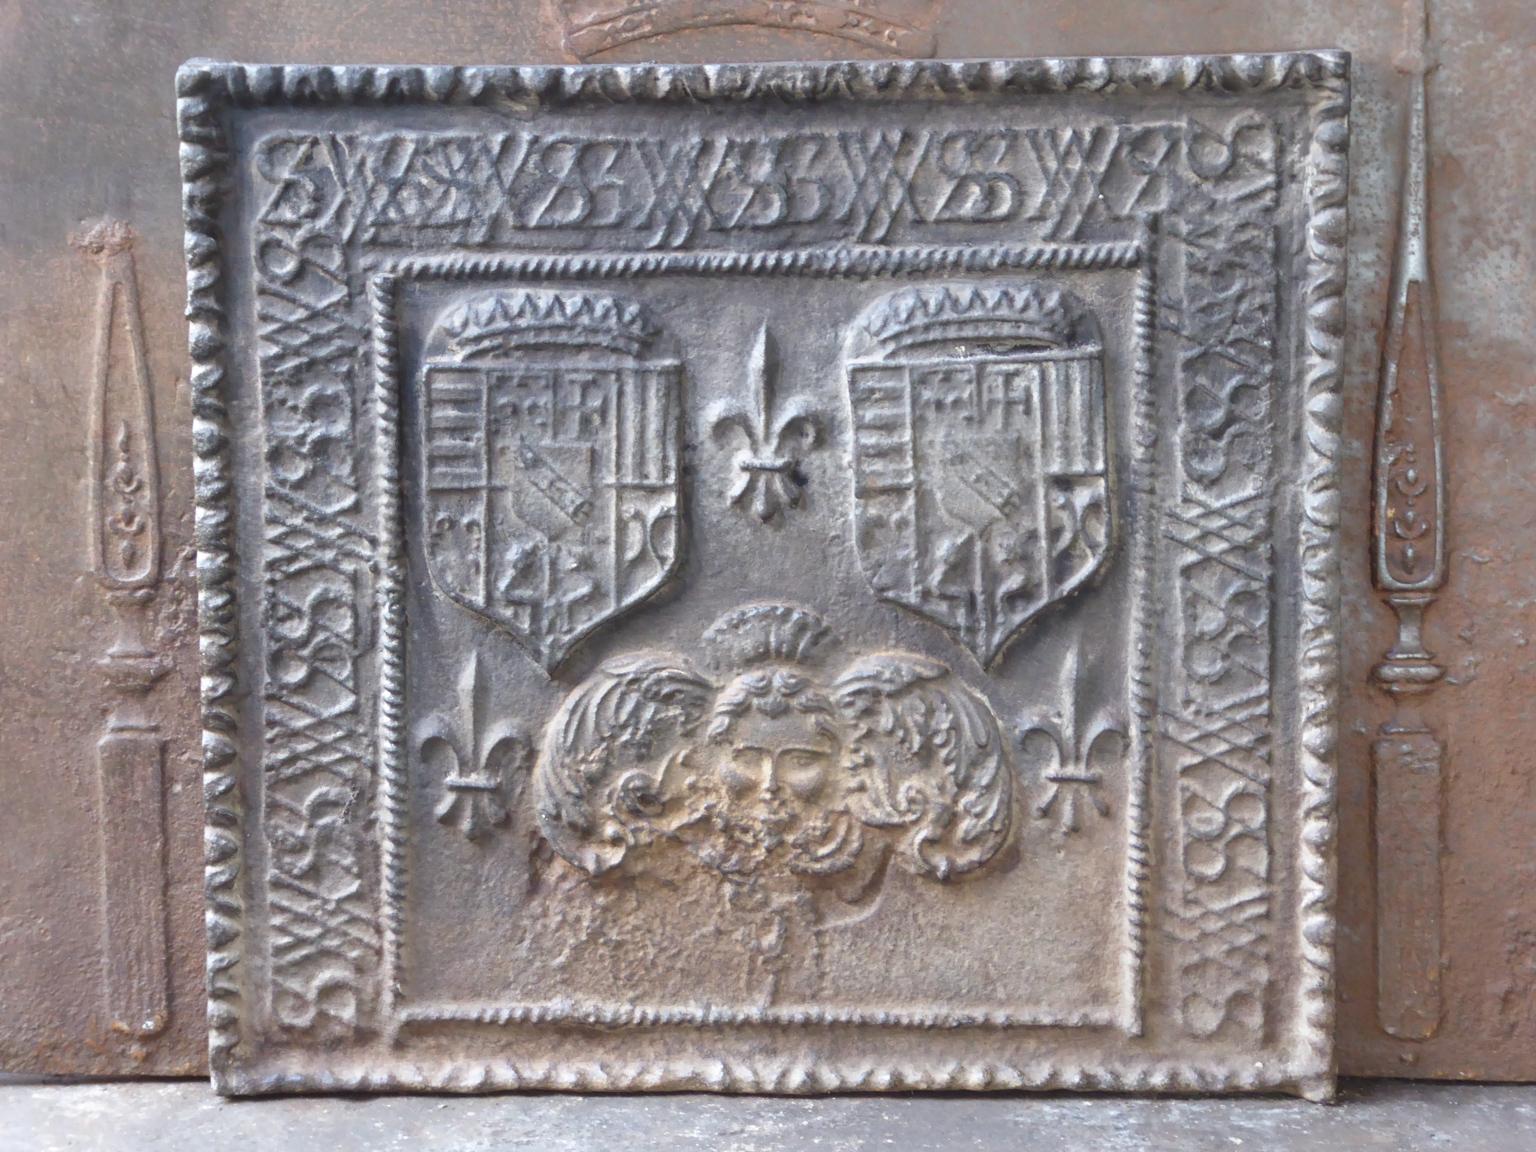 18th-19th century French Louis XIV style fireback with the arms of Leopold I, Duke of Lorraine. The fireback is made of cast iron and has a natural brown patina. Upon request it can be made black / pewter. The condition is good, no cracks.

This